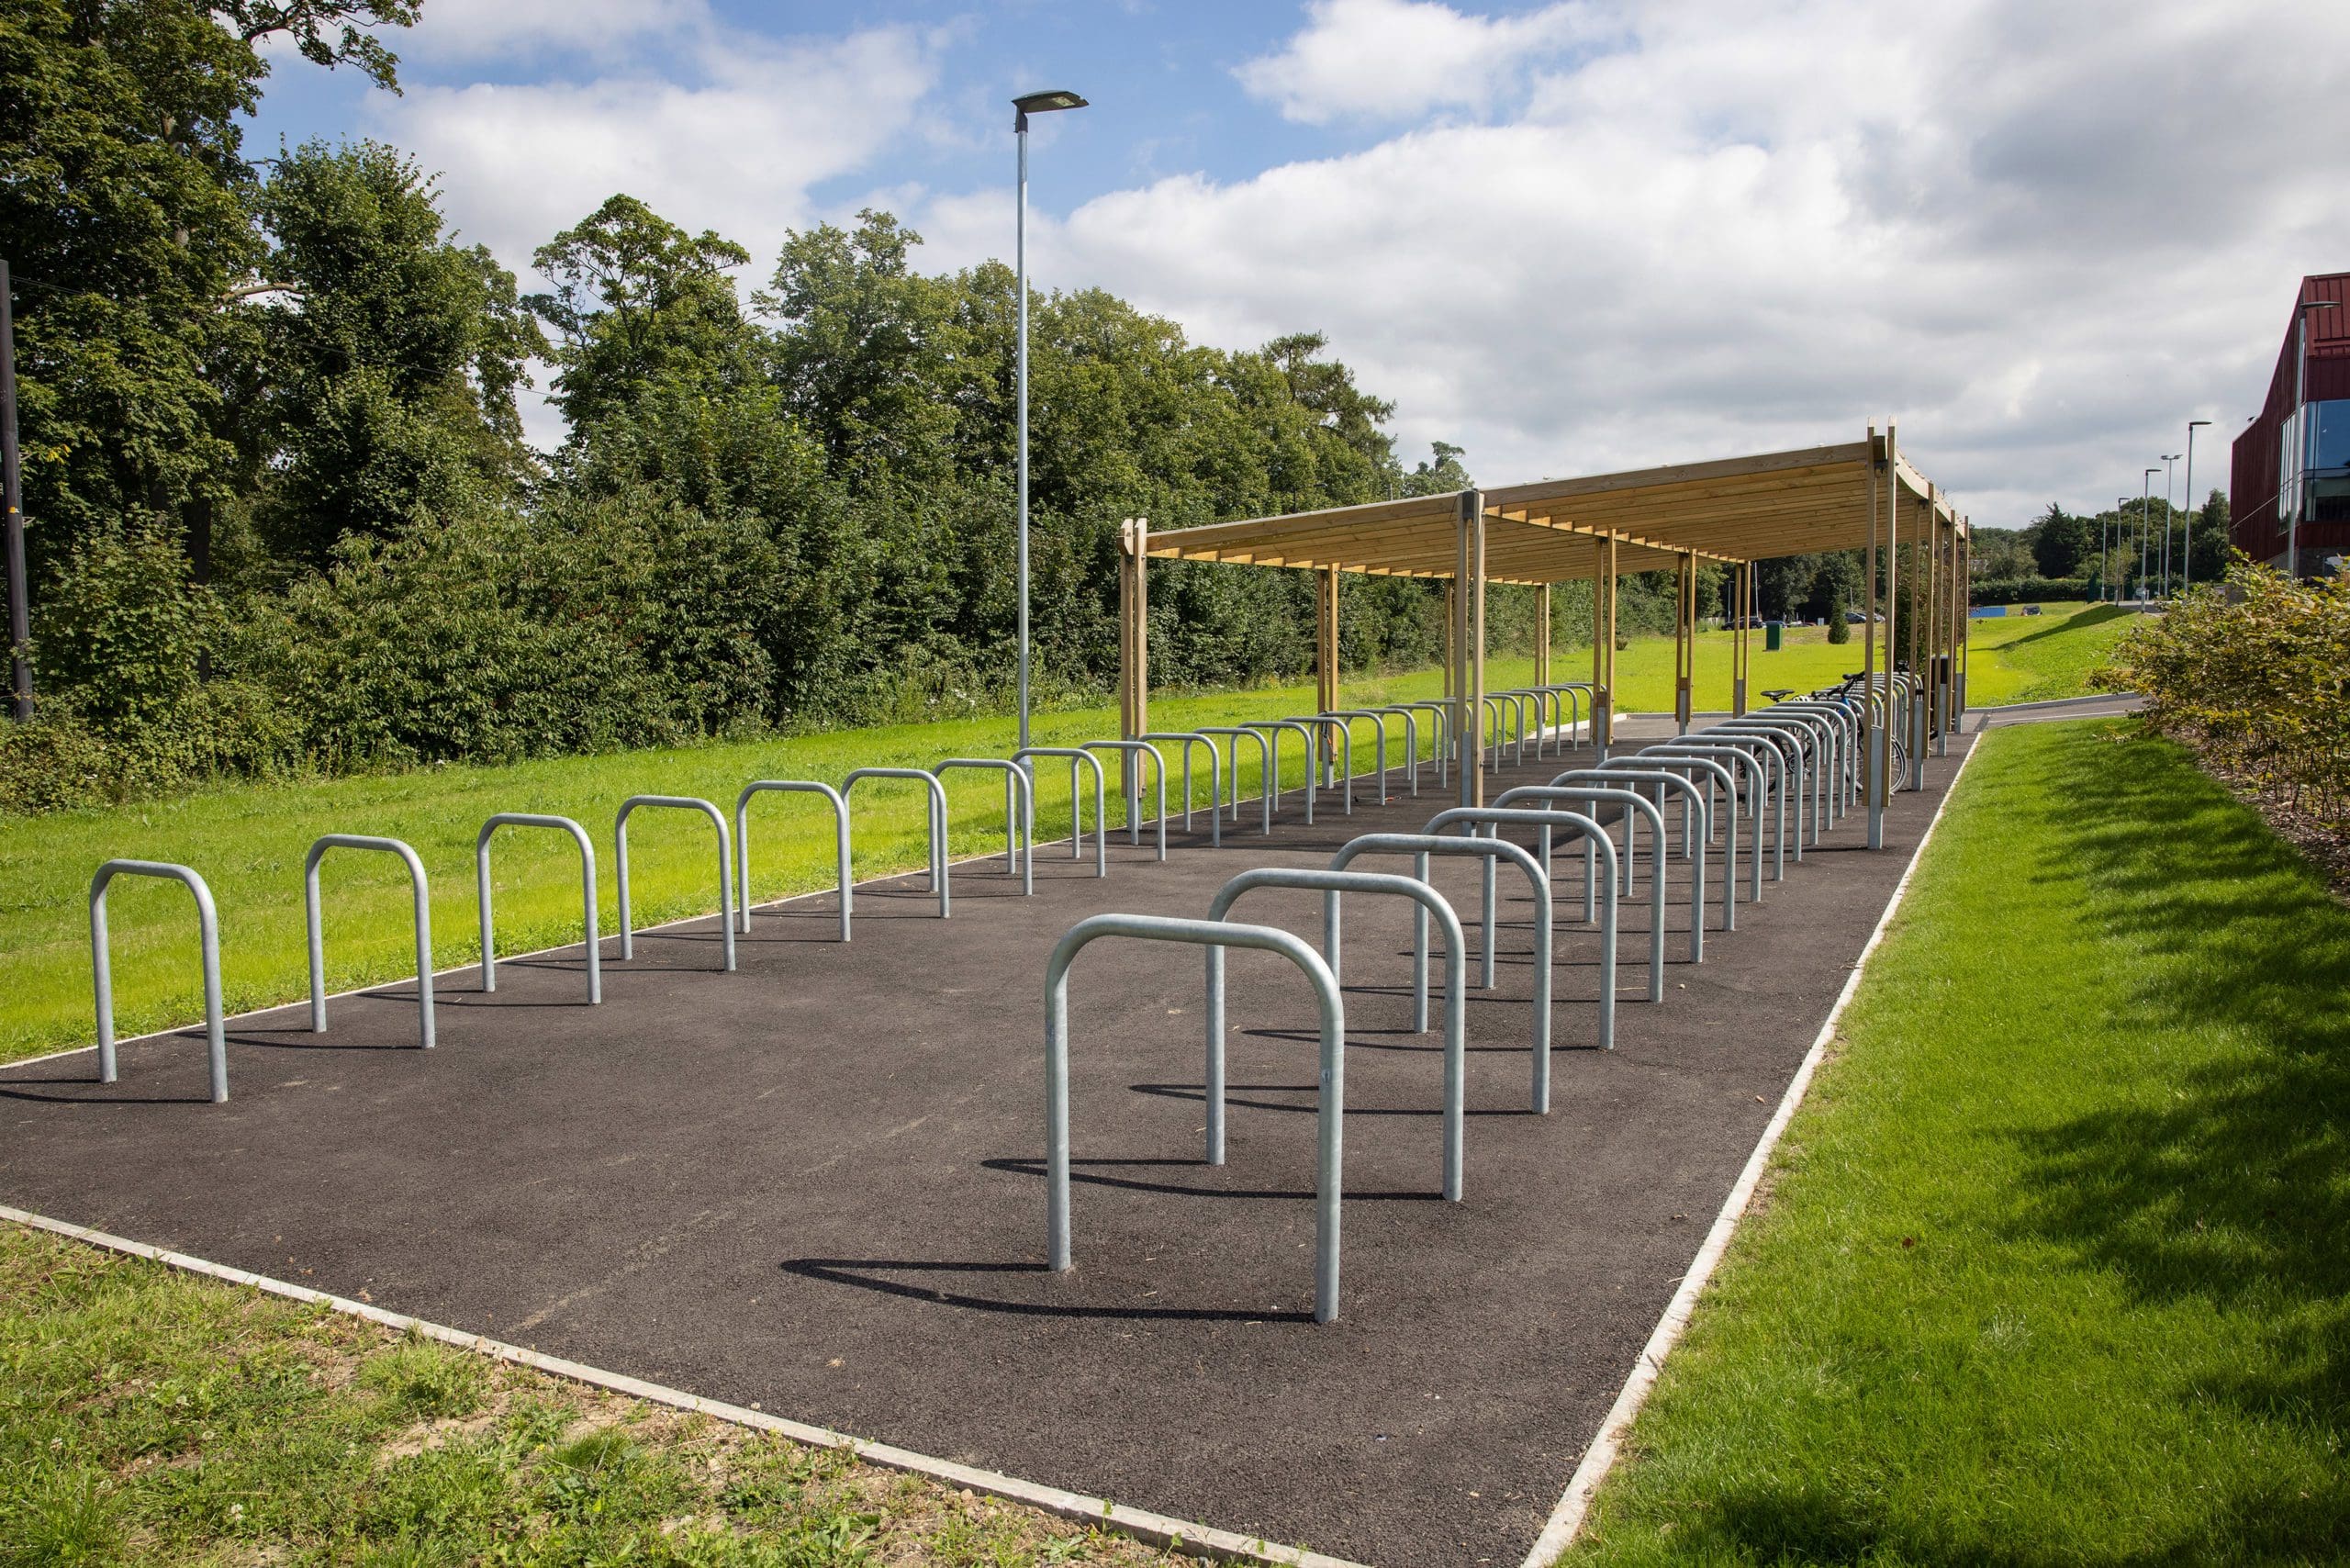 two rows of metal bike lock hoops with half under wooden pergola shelter